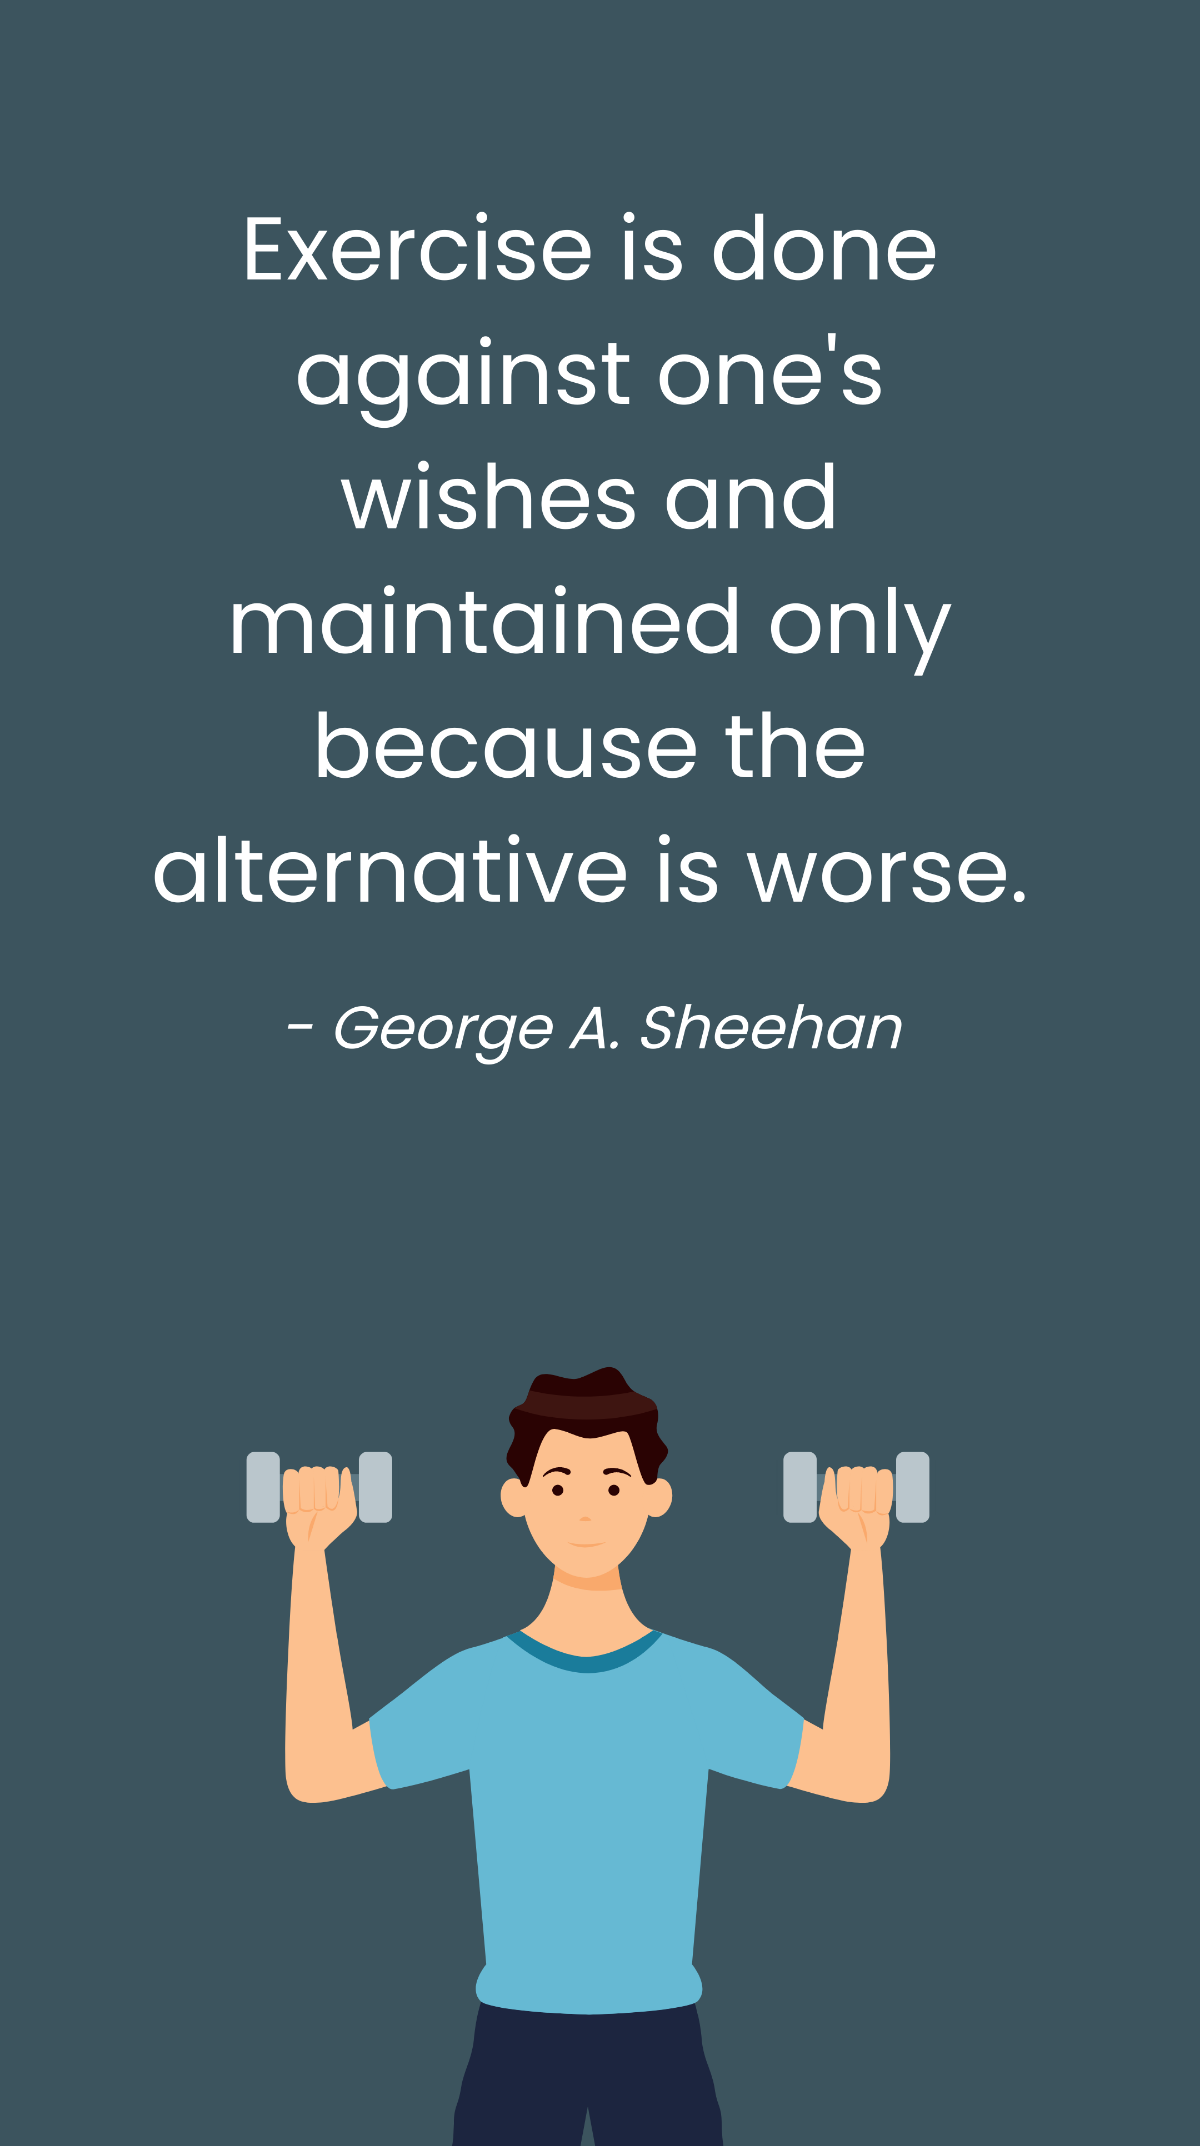 George A. Sheehan - Exercise is done against one's wishes and maintained only because the alternative is worse. Template